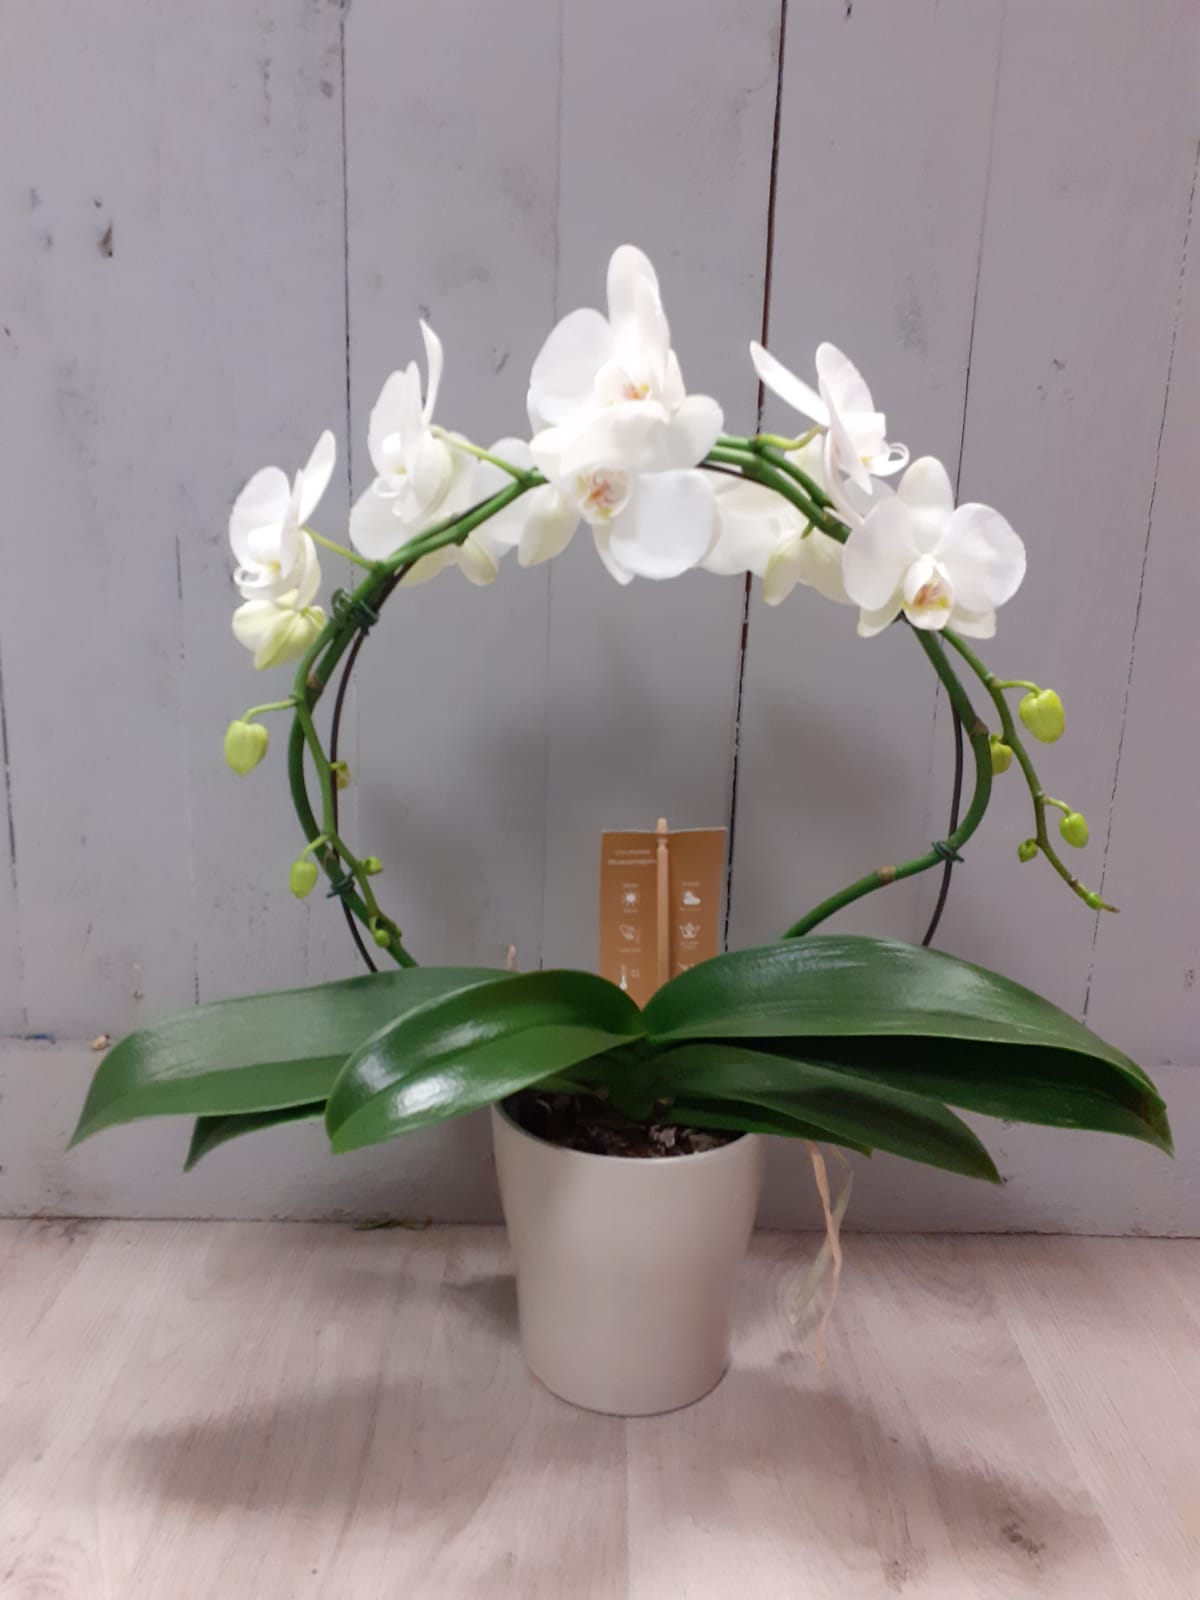 Deluxe White Orchid Plant in Ceramic Pot